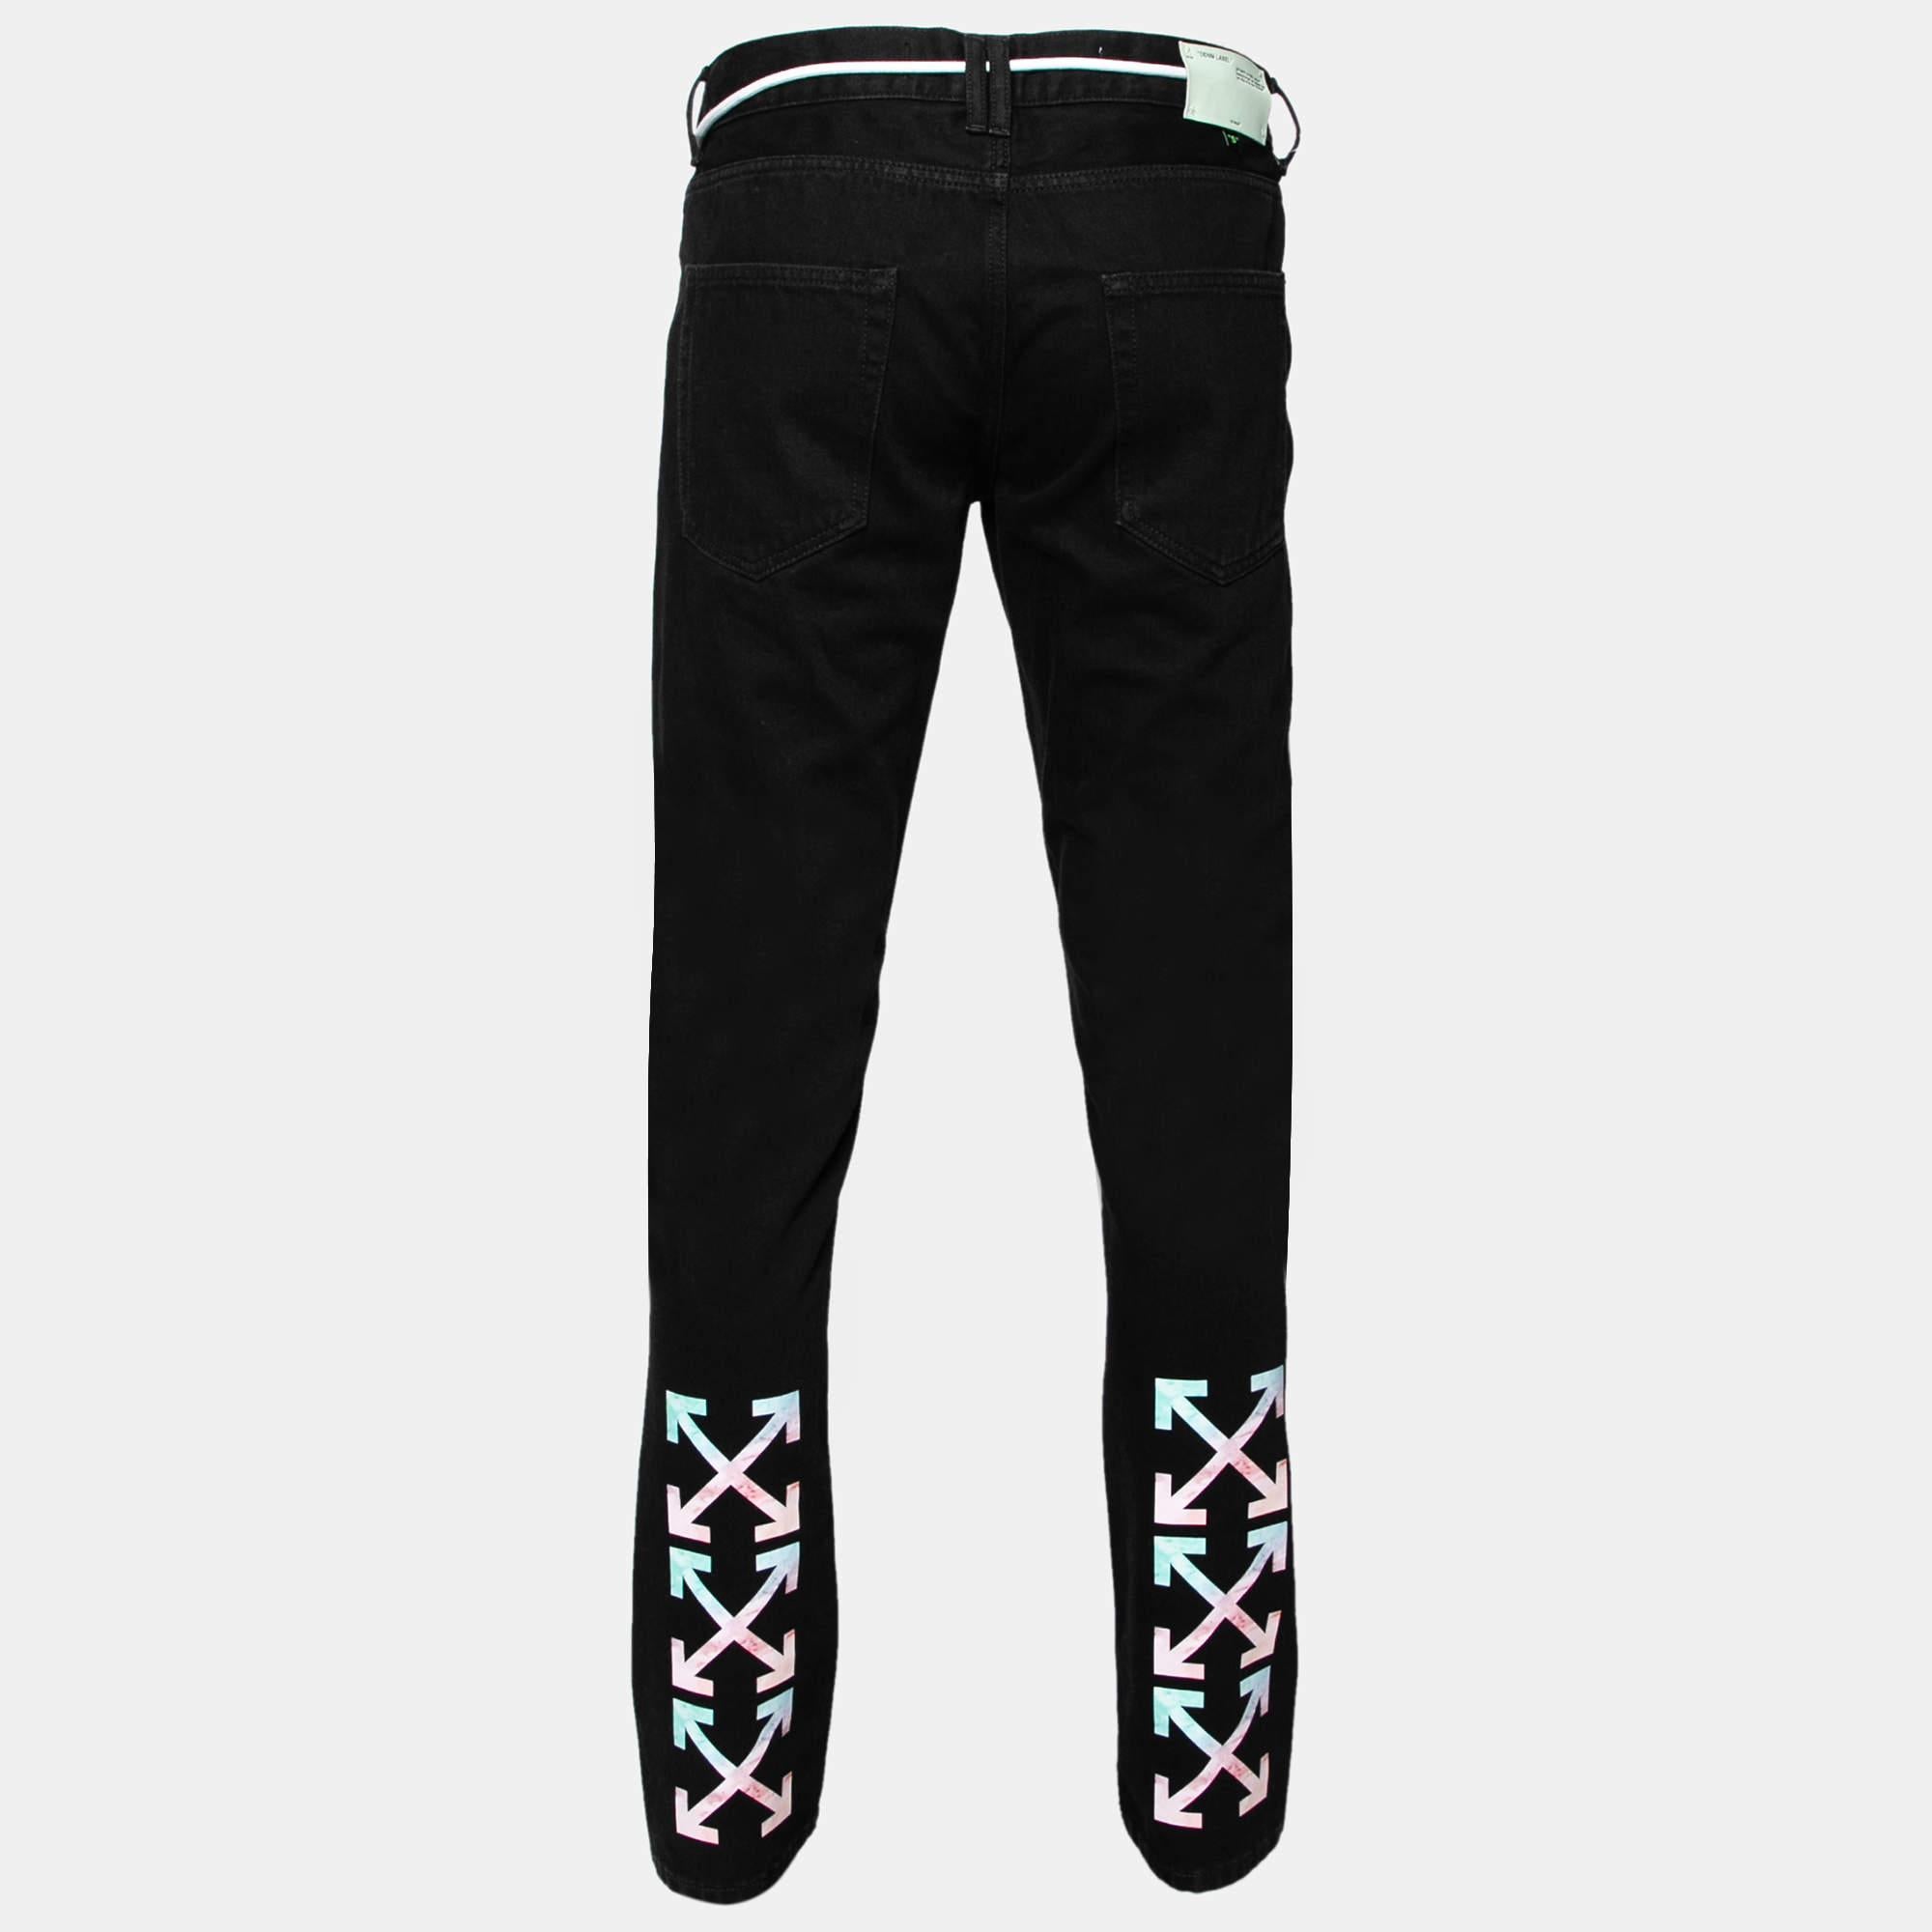 Be fashionable this season by flaunting this pair of jeans by Off-White. Style this pair in a black hue with a t-shirt and sneakers for a dapper look. Stand apart from the crowd by wearing this pair of arrow-printed jeans, designed with a drawstring